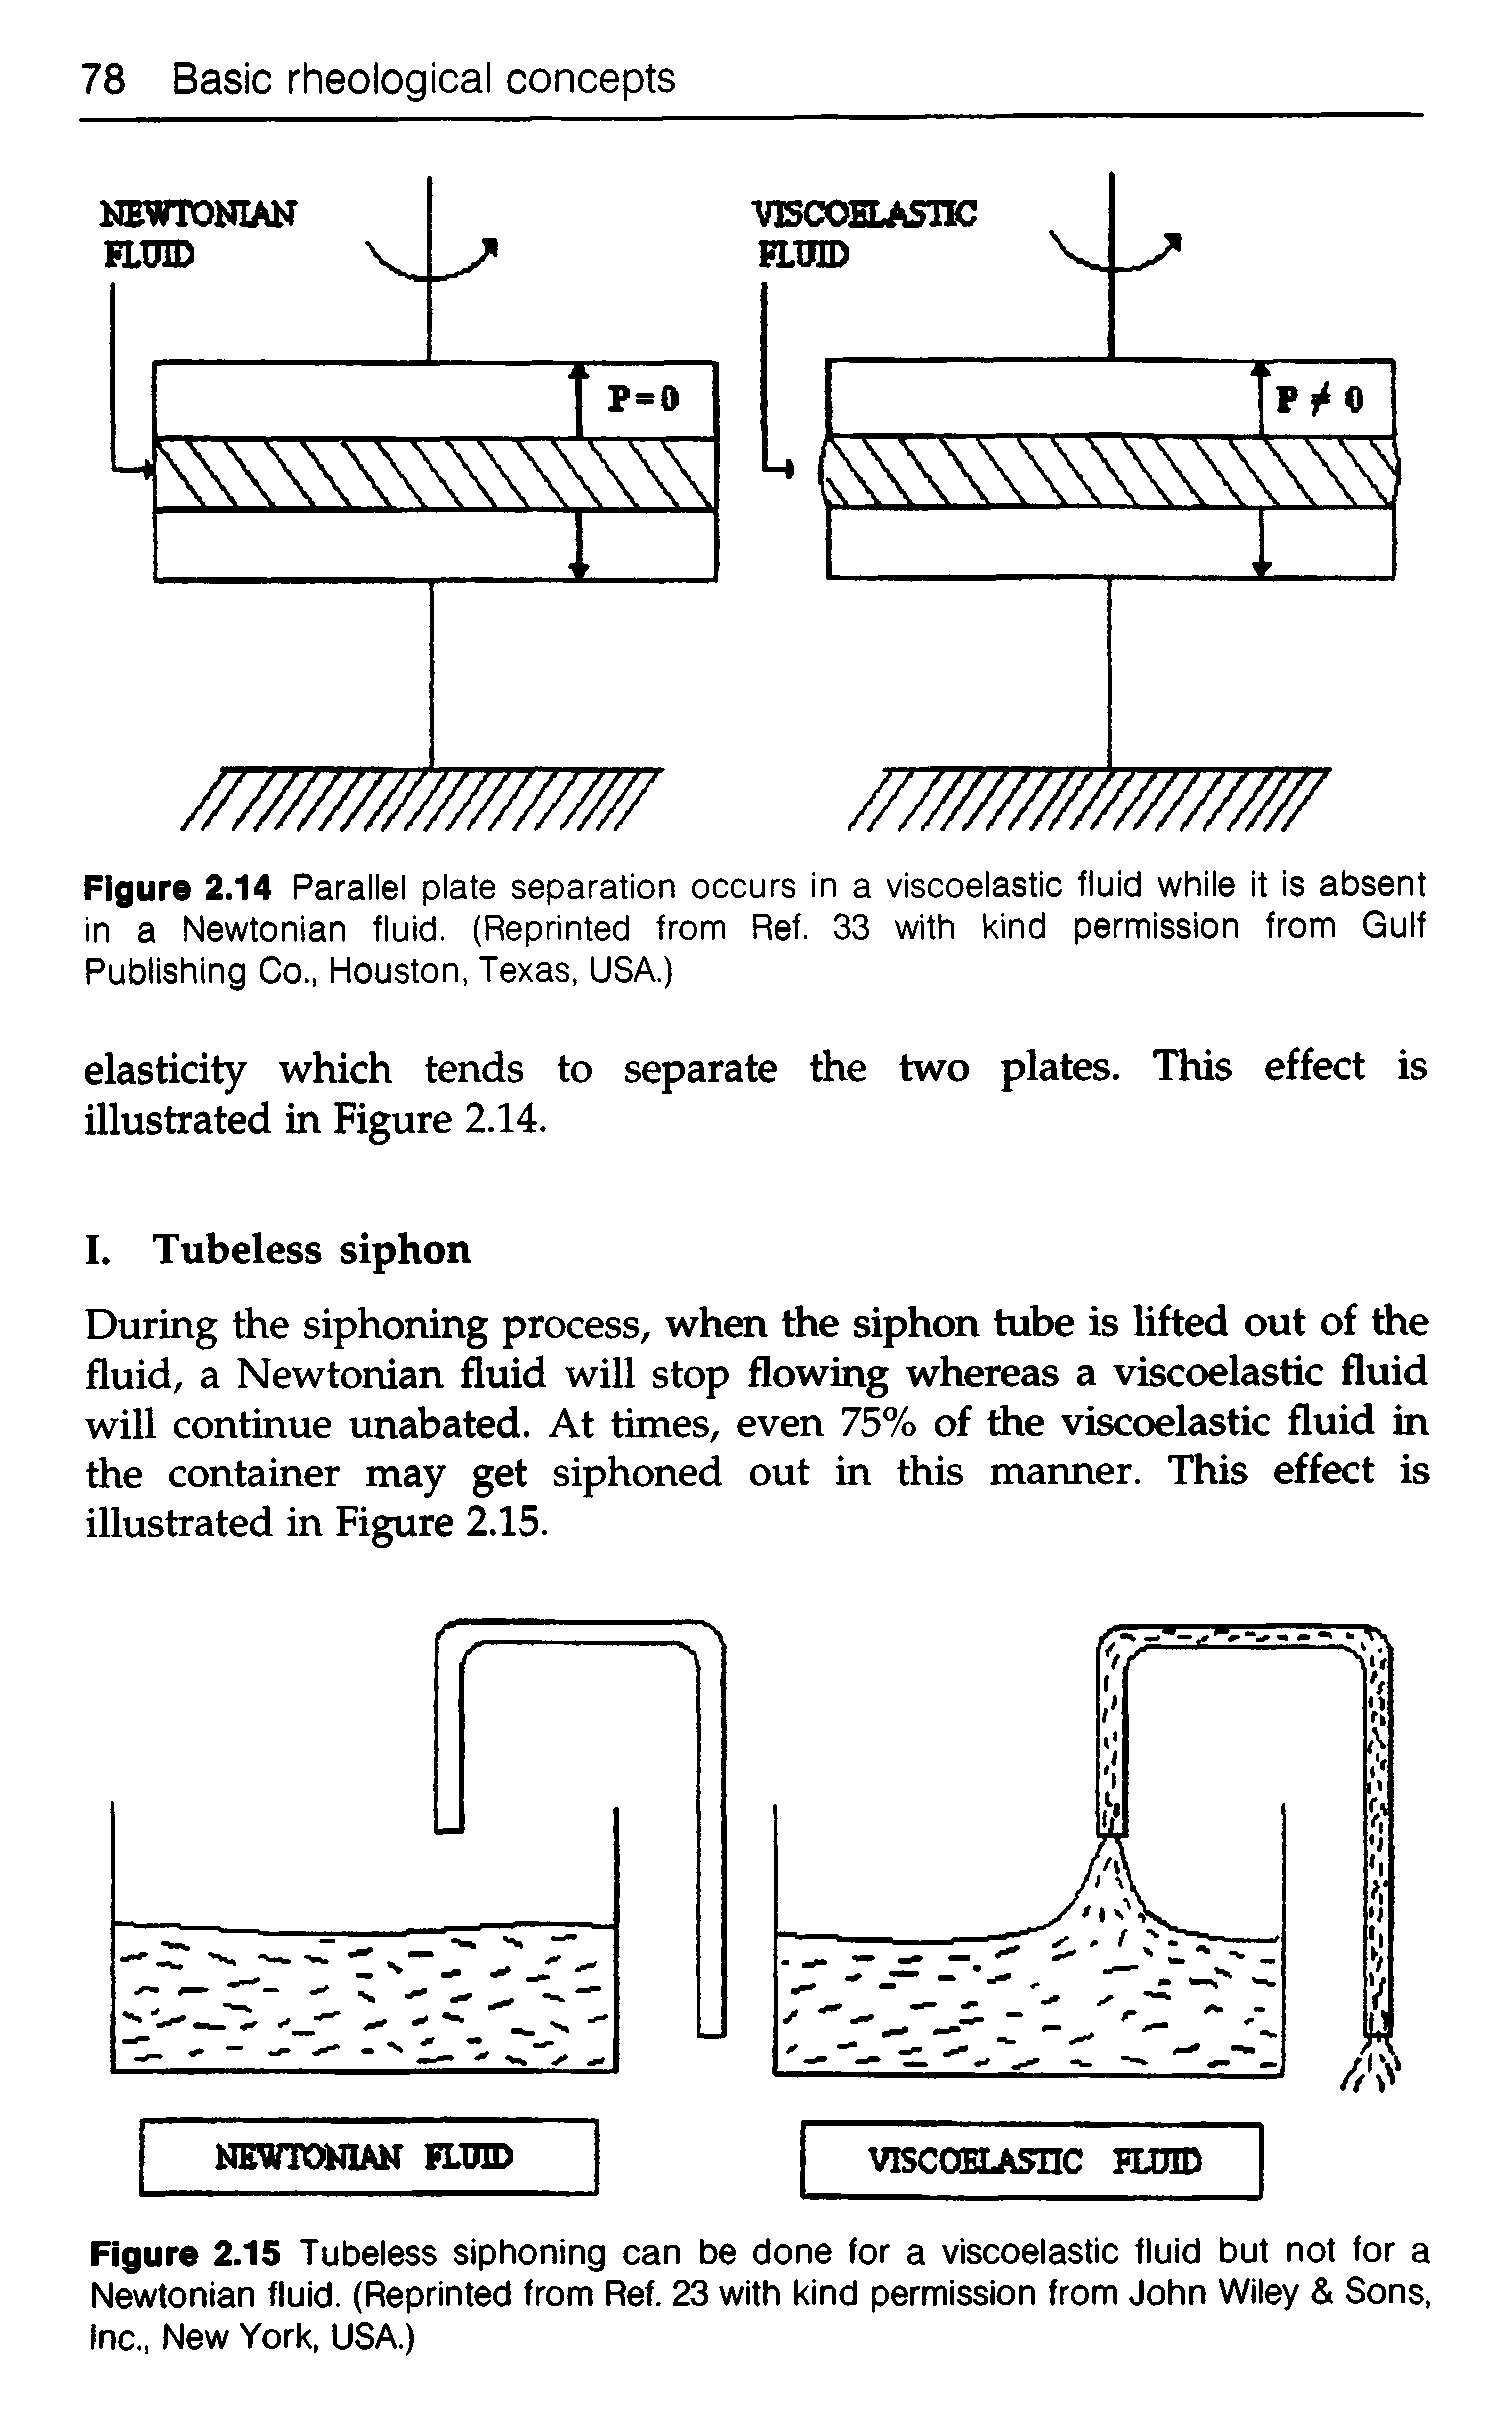 Figure 2.15 Tubeless siphoning can be done for a viscoelastic fluid but not for a Newtonian fluid. (Reprinted from Ref. 23 with kind permission from John Wiley Sons, Inc., New York. USA.)...